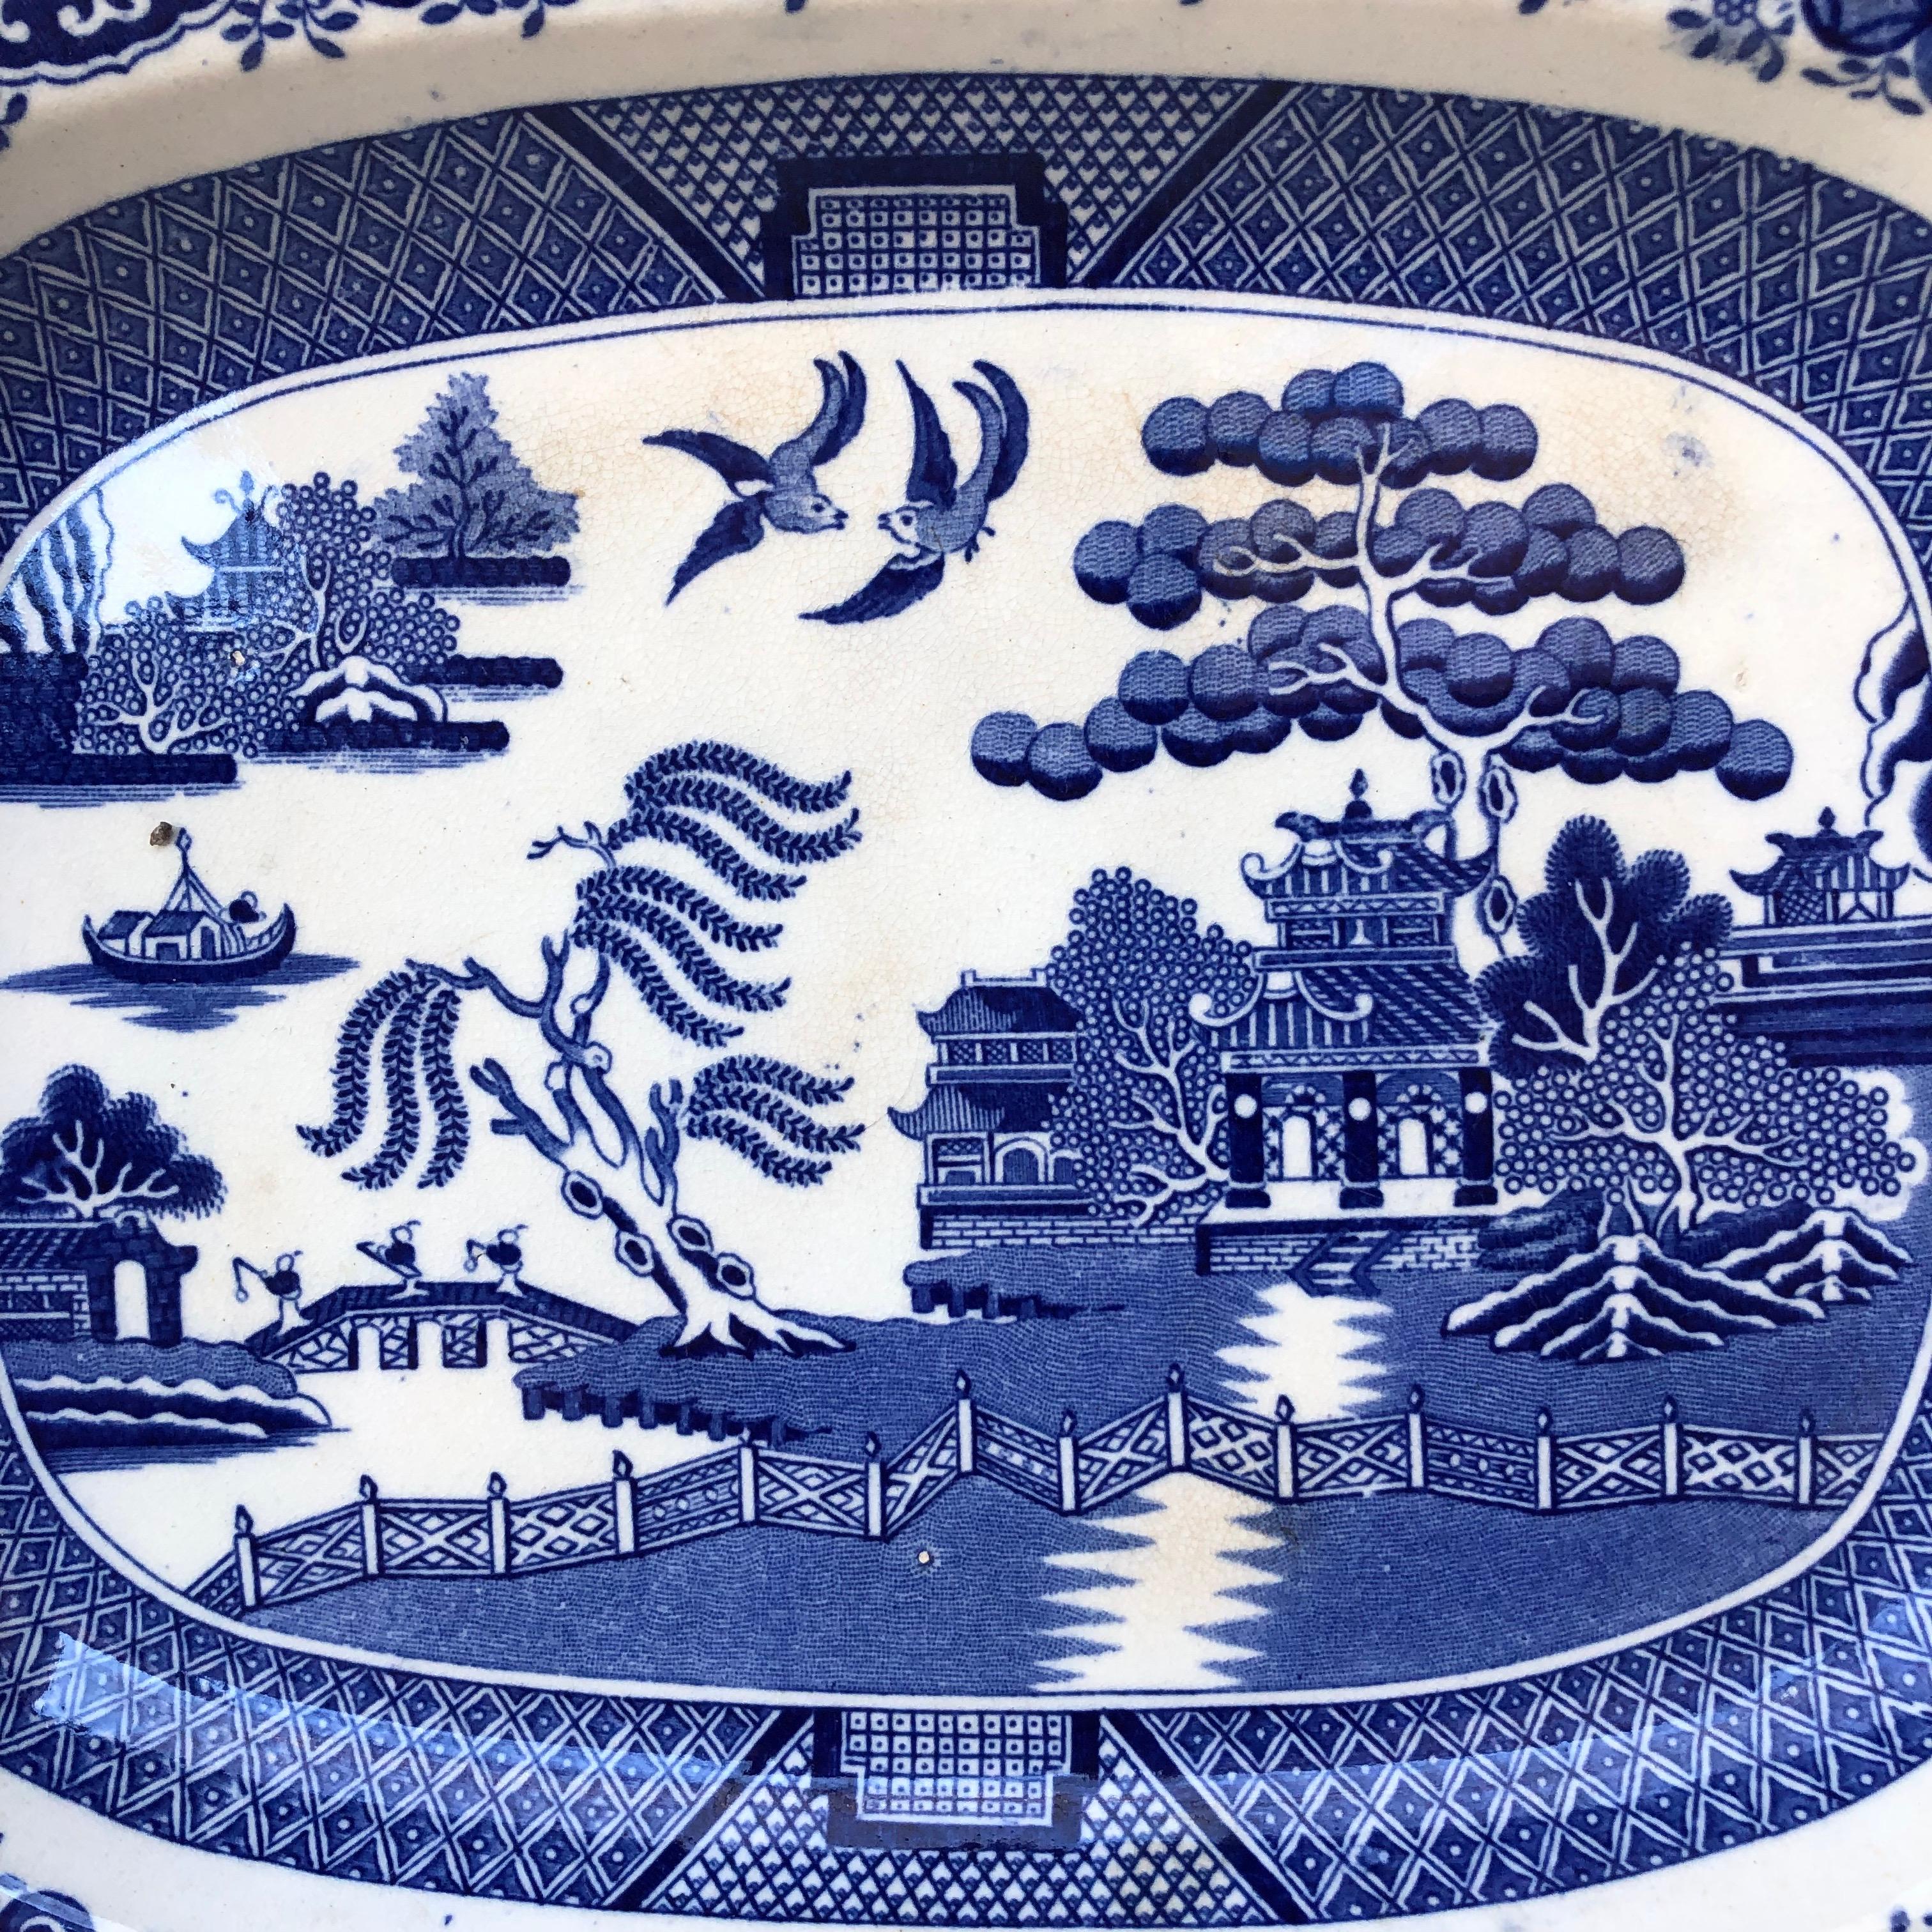 19th Century English Blue & White Willow Chinoiserie Meat Platter.
Meaning: 12.8